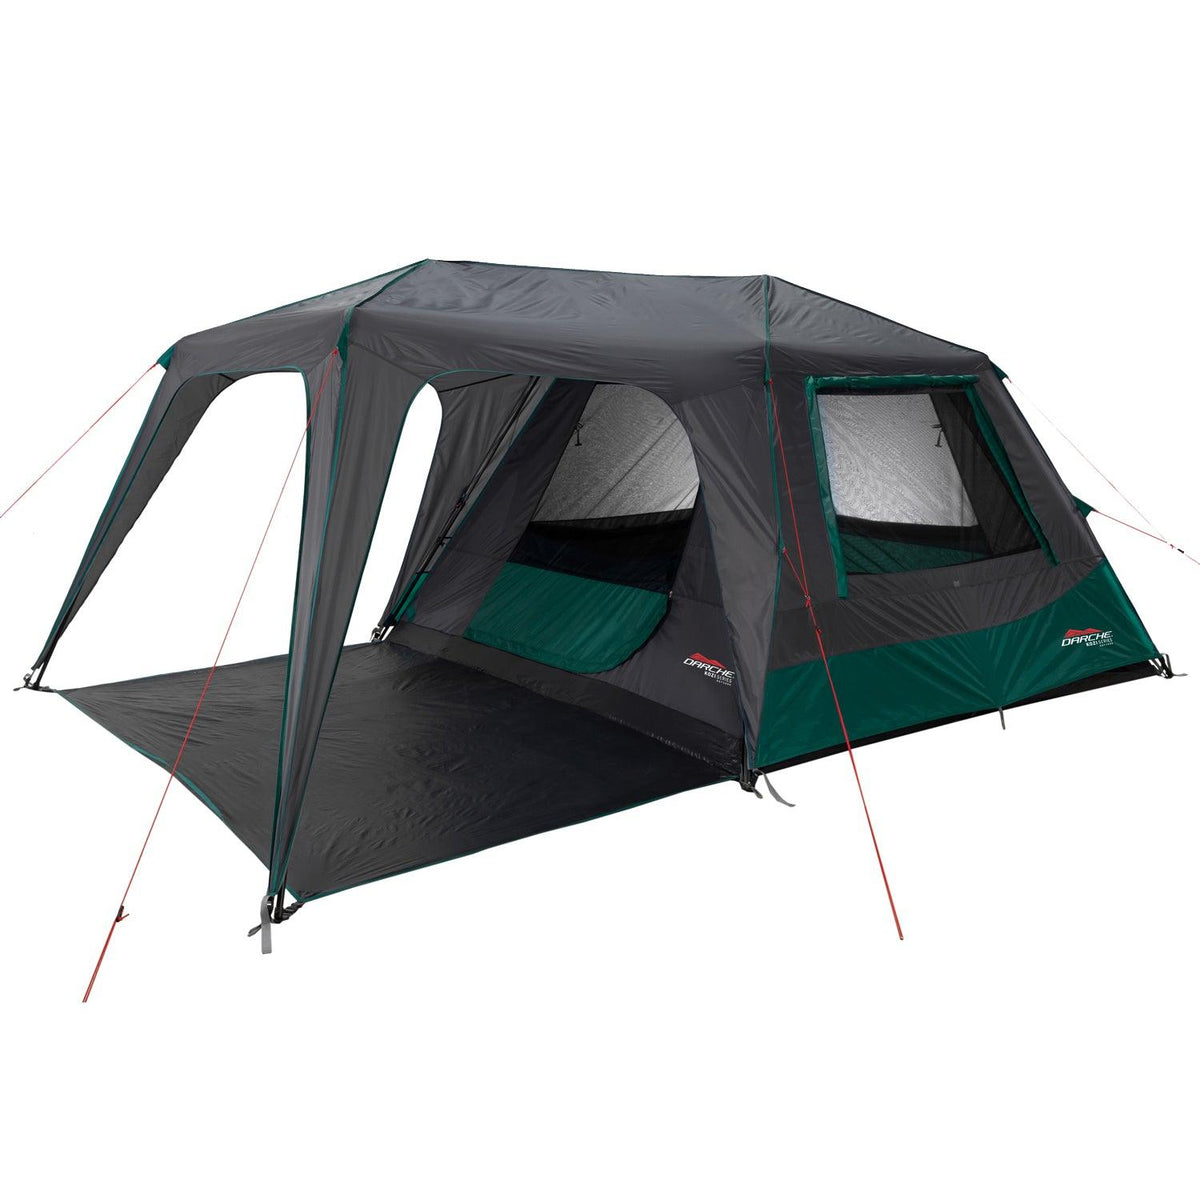 Kozi 6p Instant Tent KOZI 6P INSTANT TENT Shelters Darche- Overland Kitted